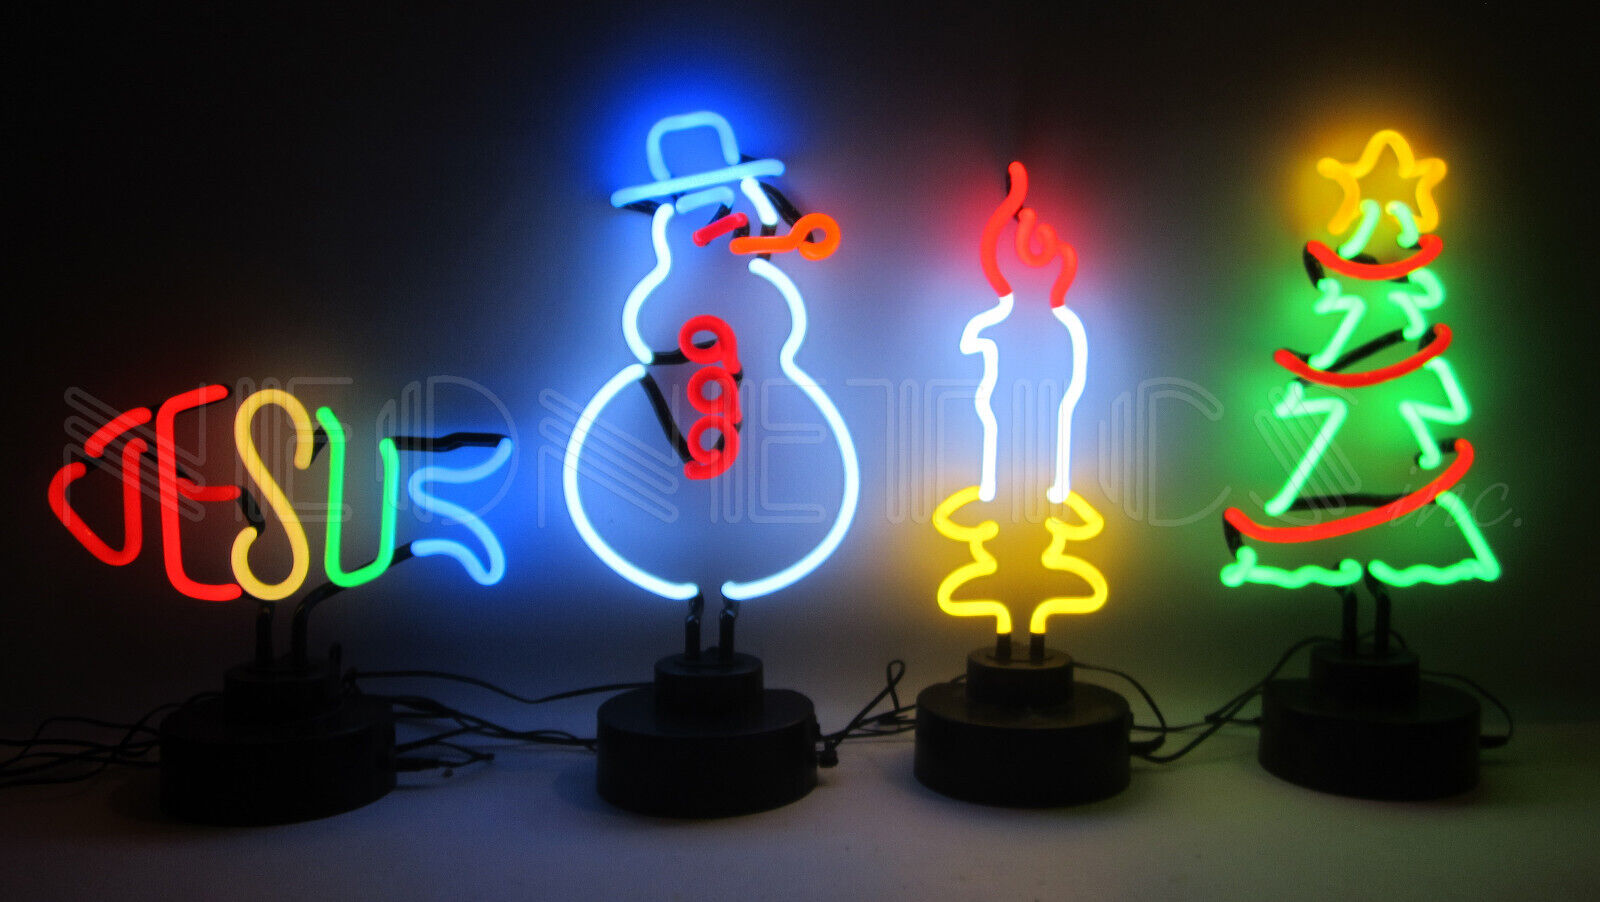 4 Neon sculpture sign Christams Xmas Tree Candle lights Jesus Fish Snowman